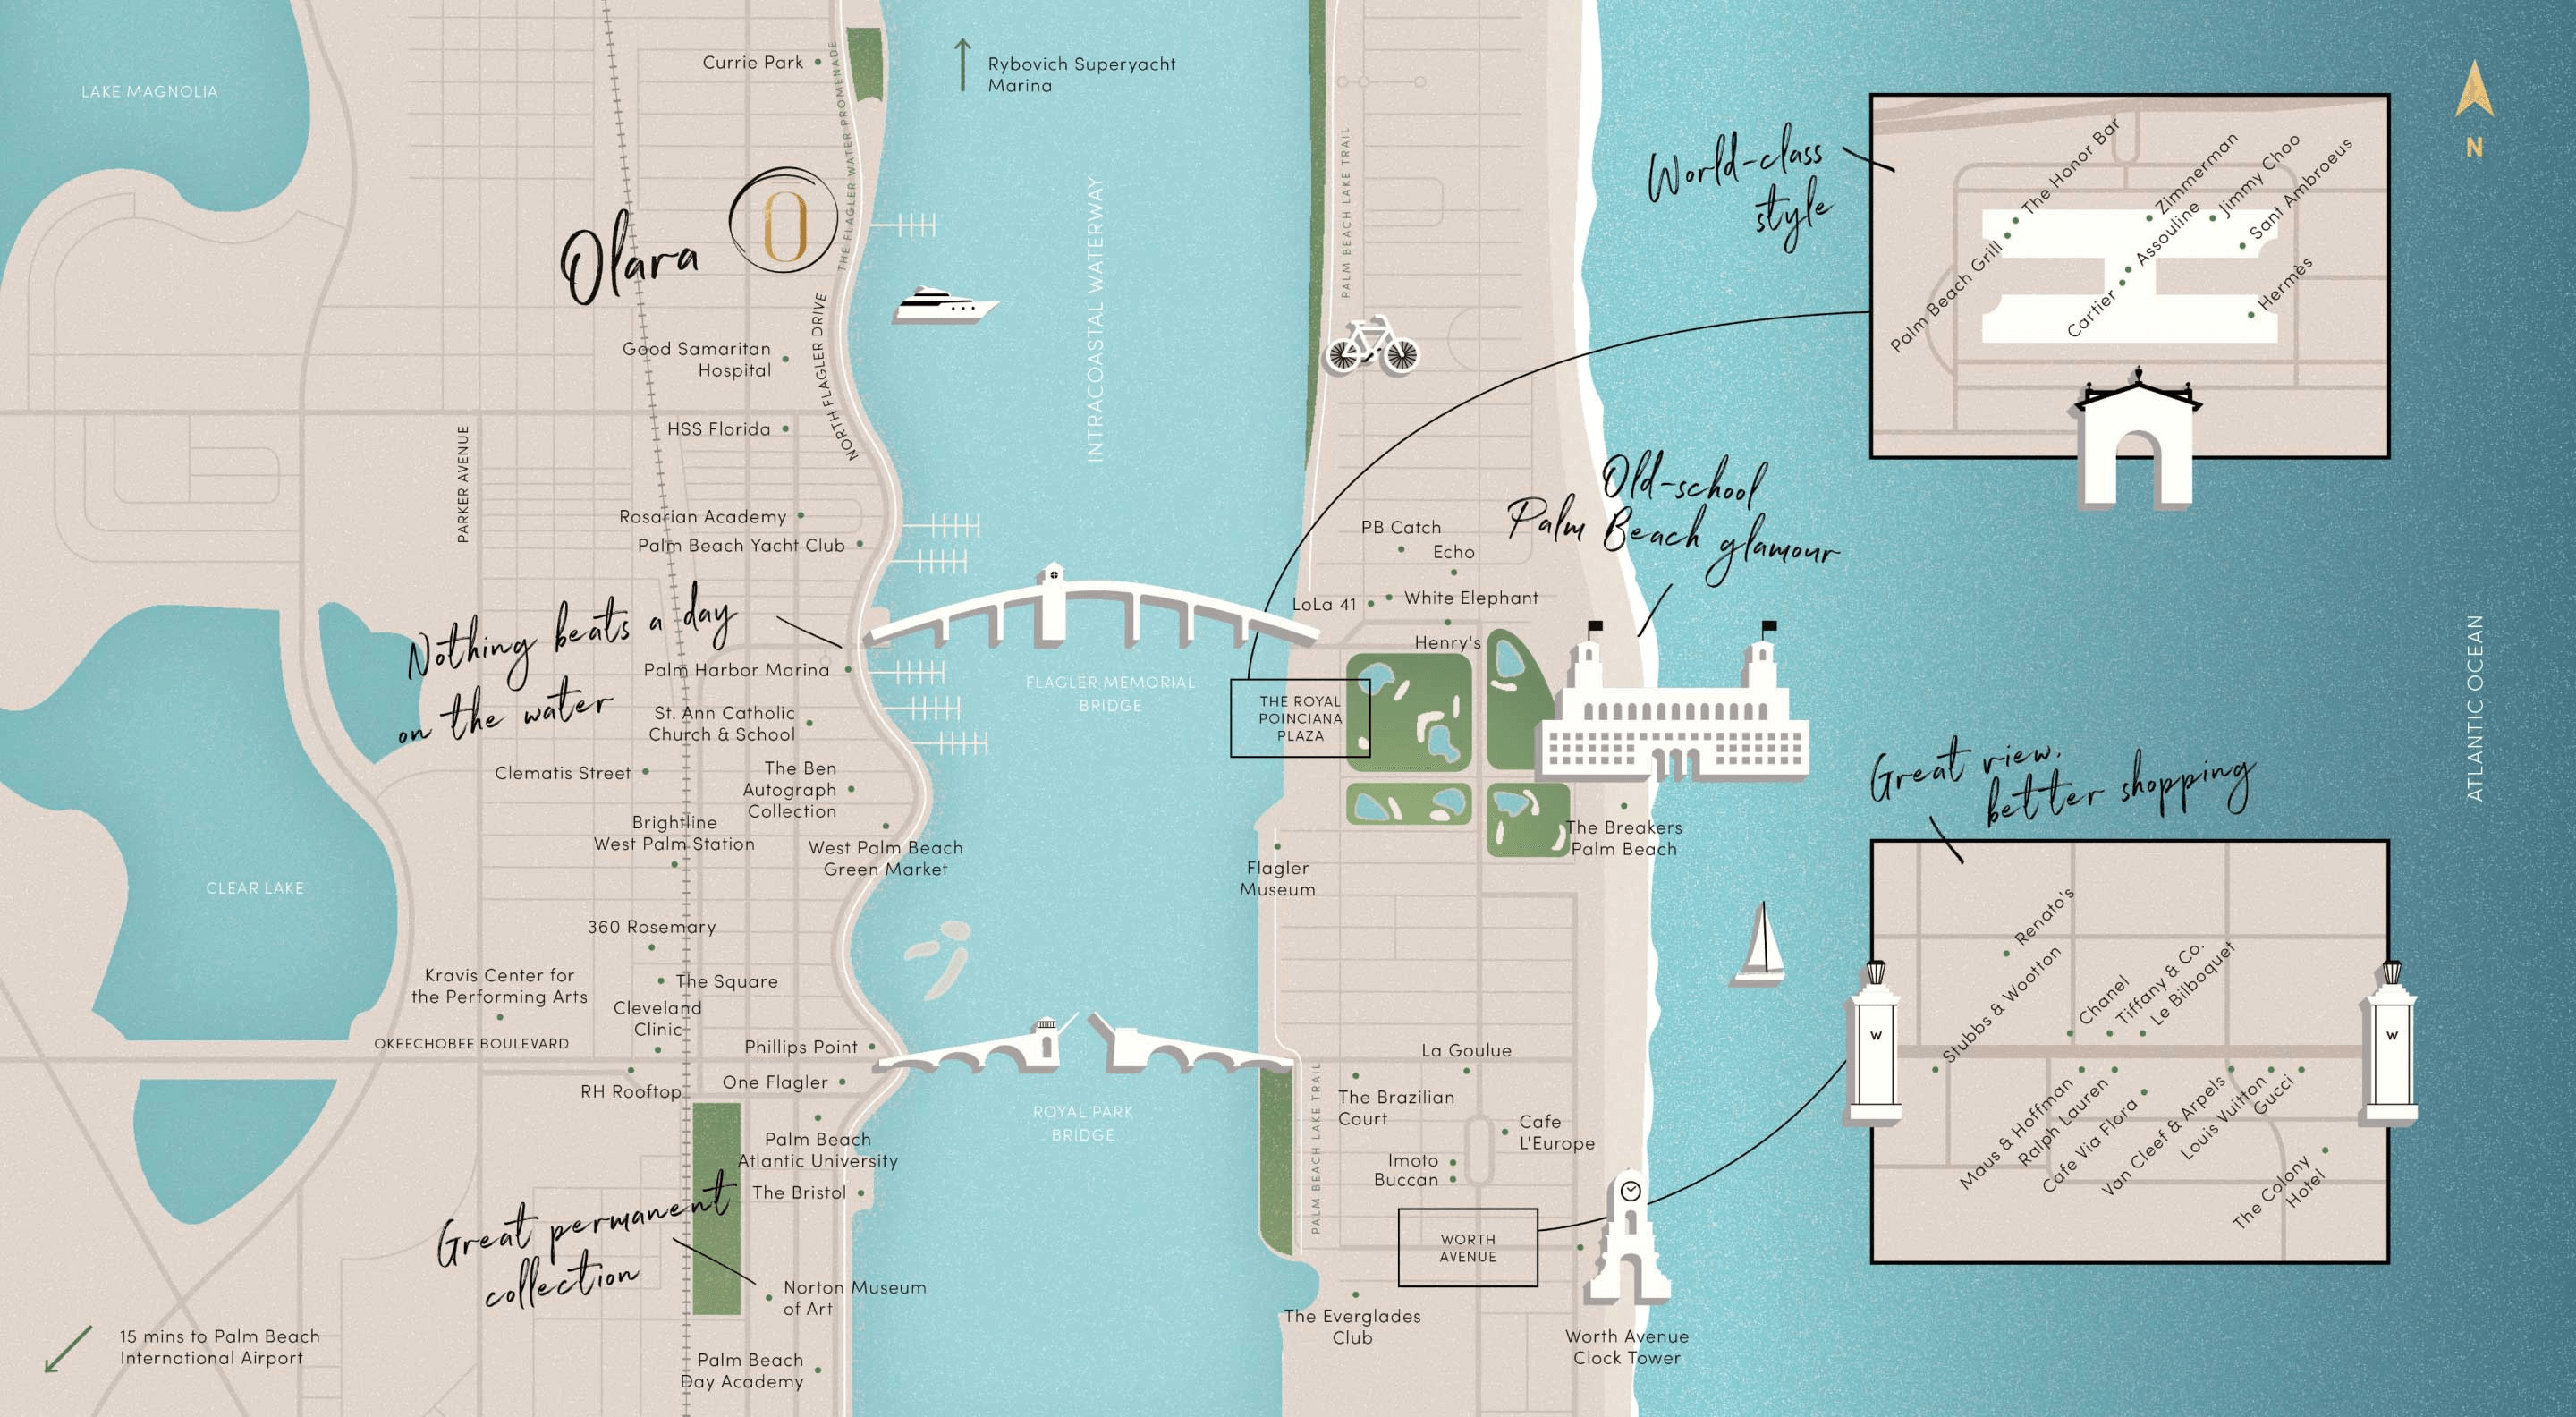 illustrated map of Olara residences and palm beach